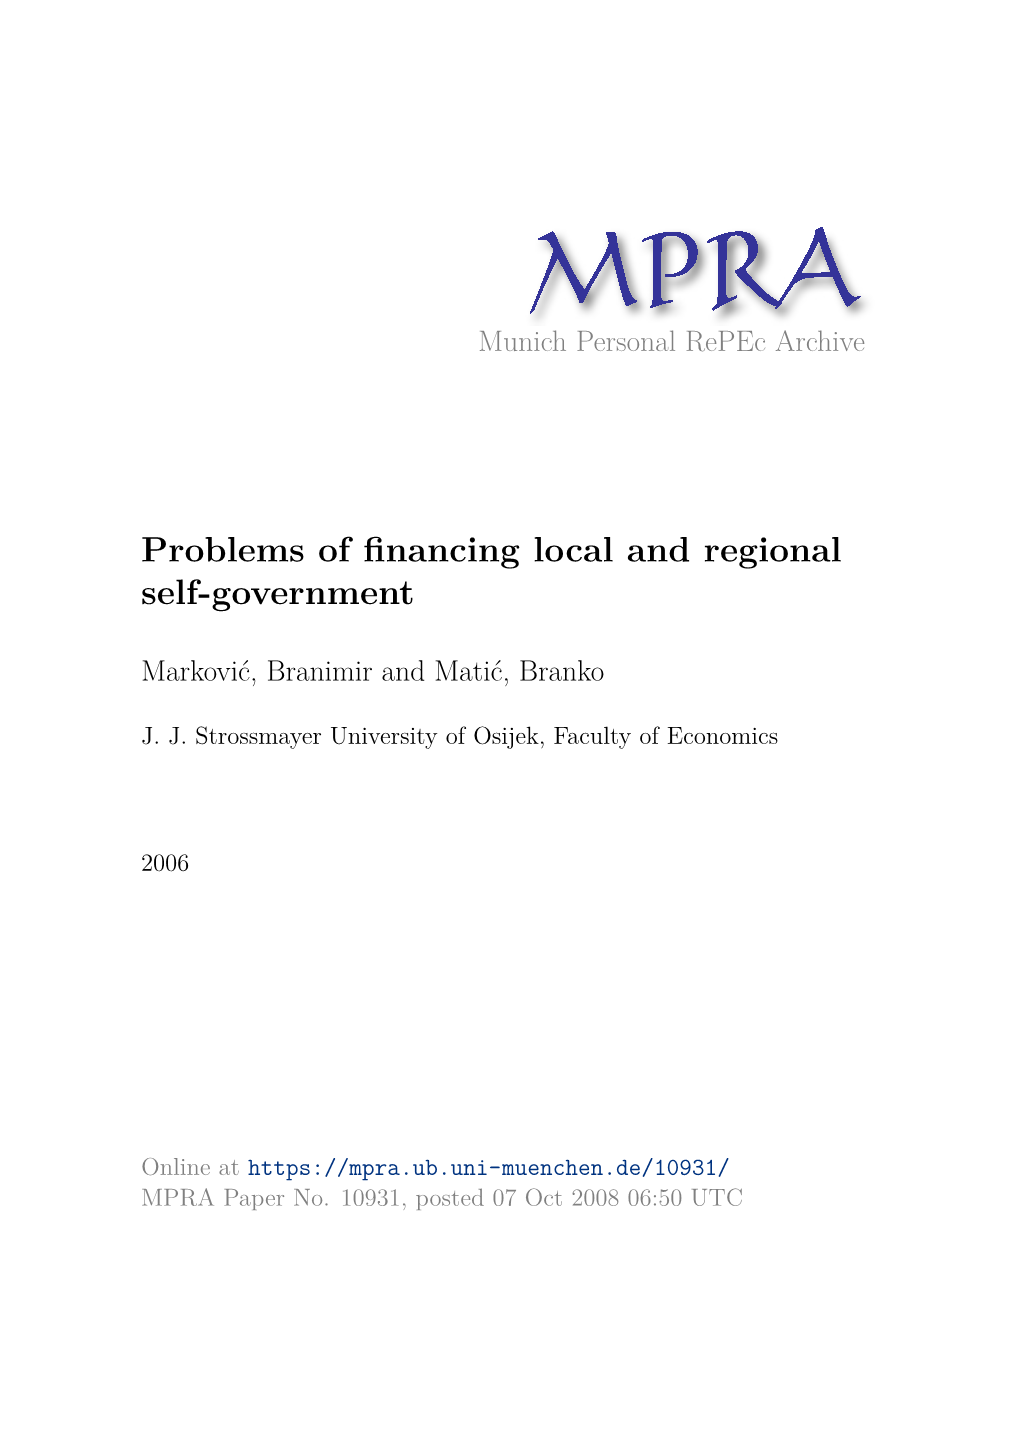 Problems of Financing Local and Regional Self-Government